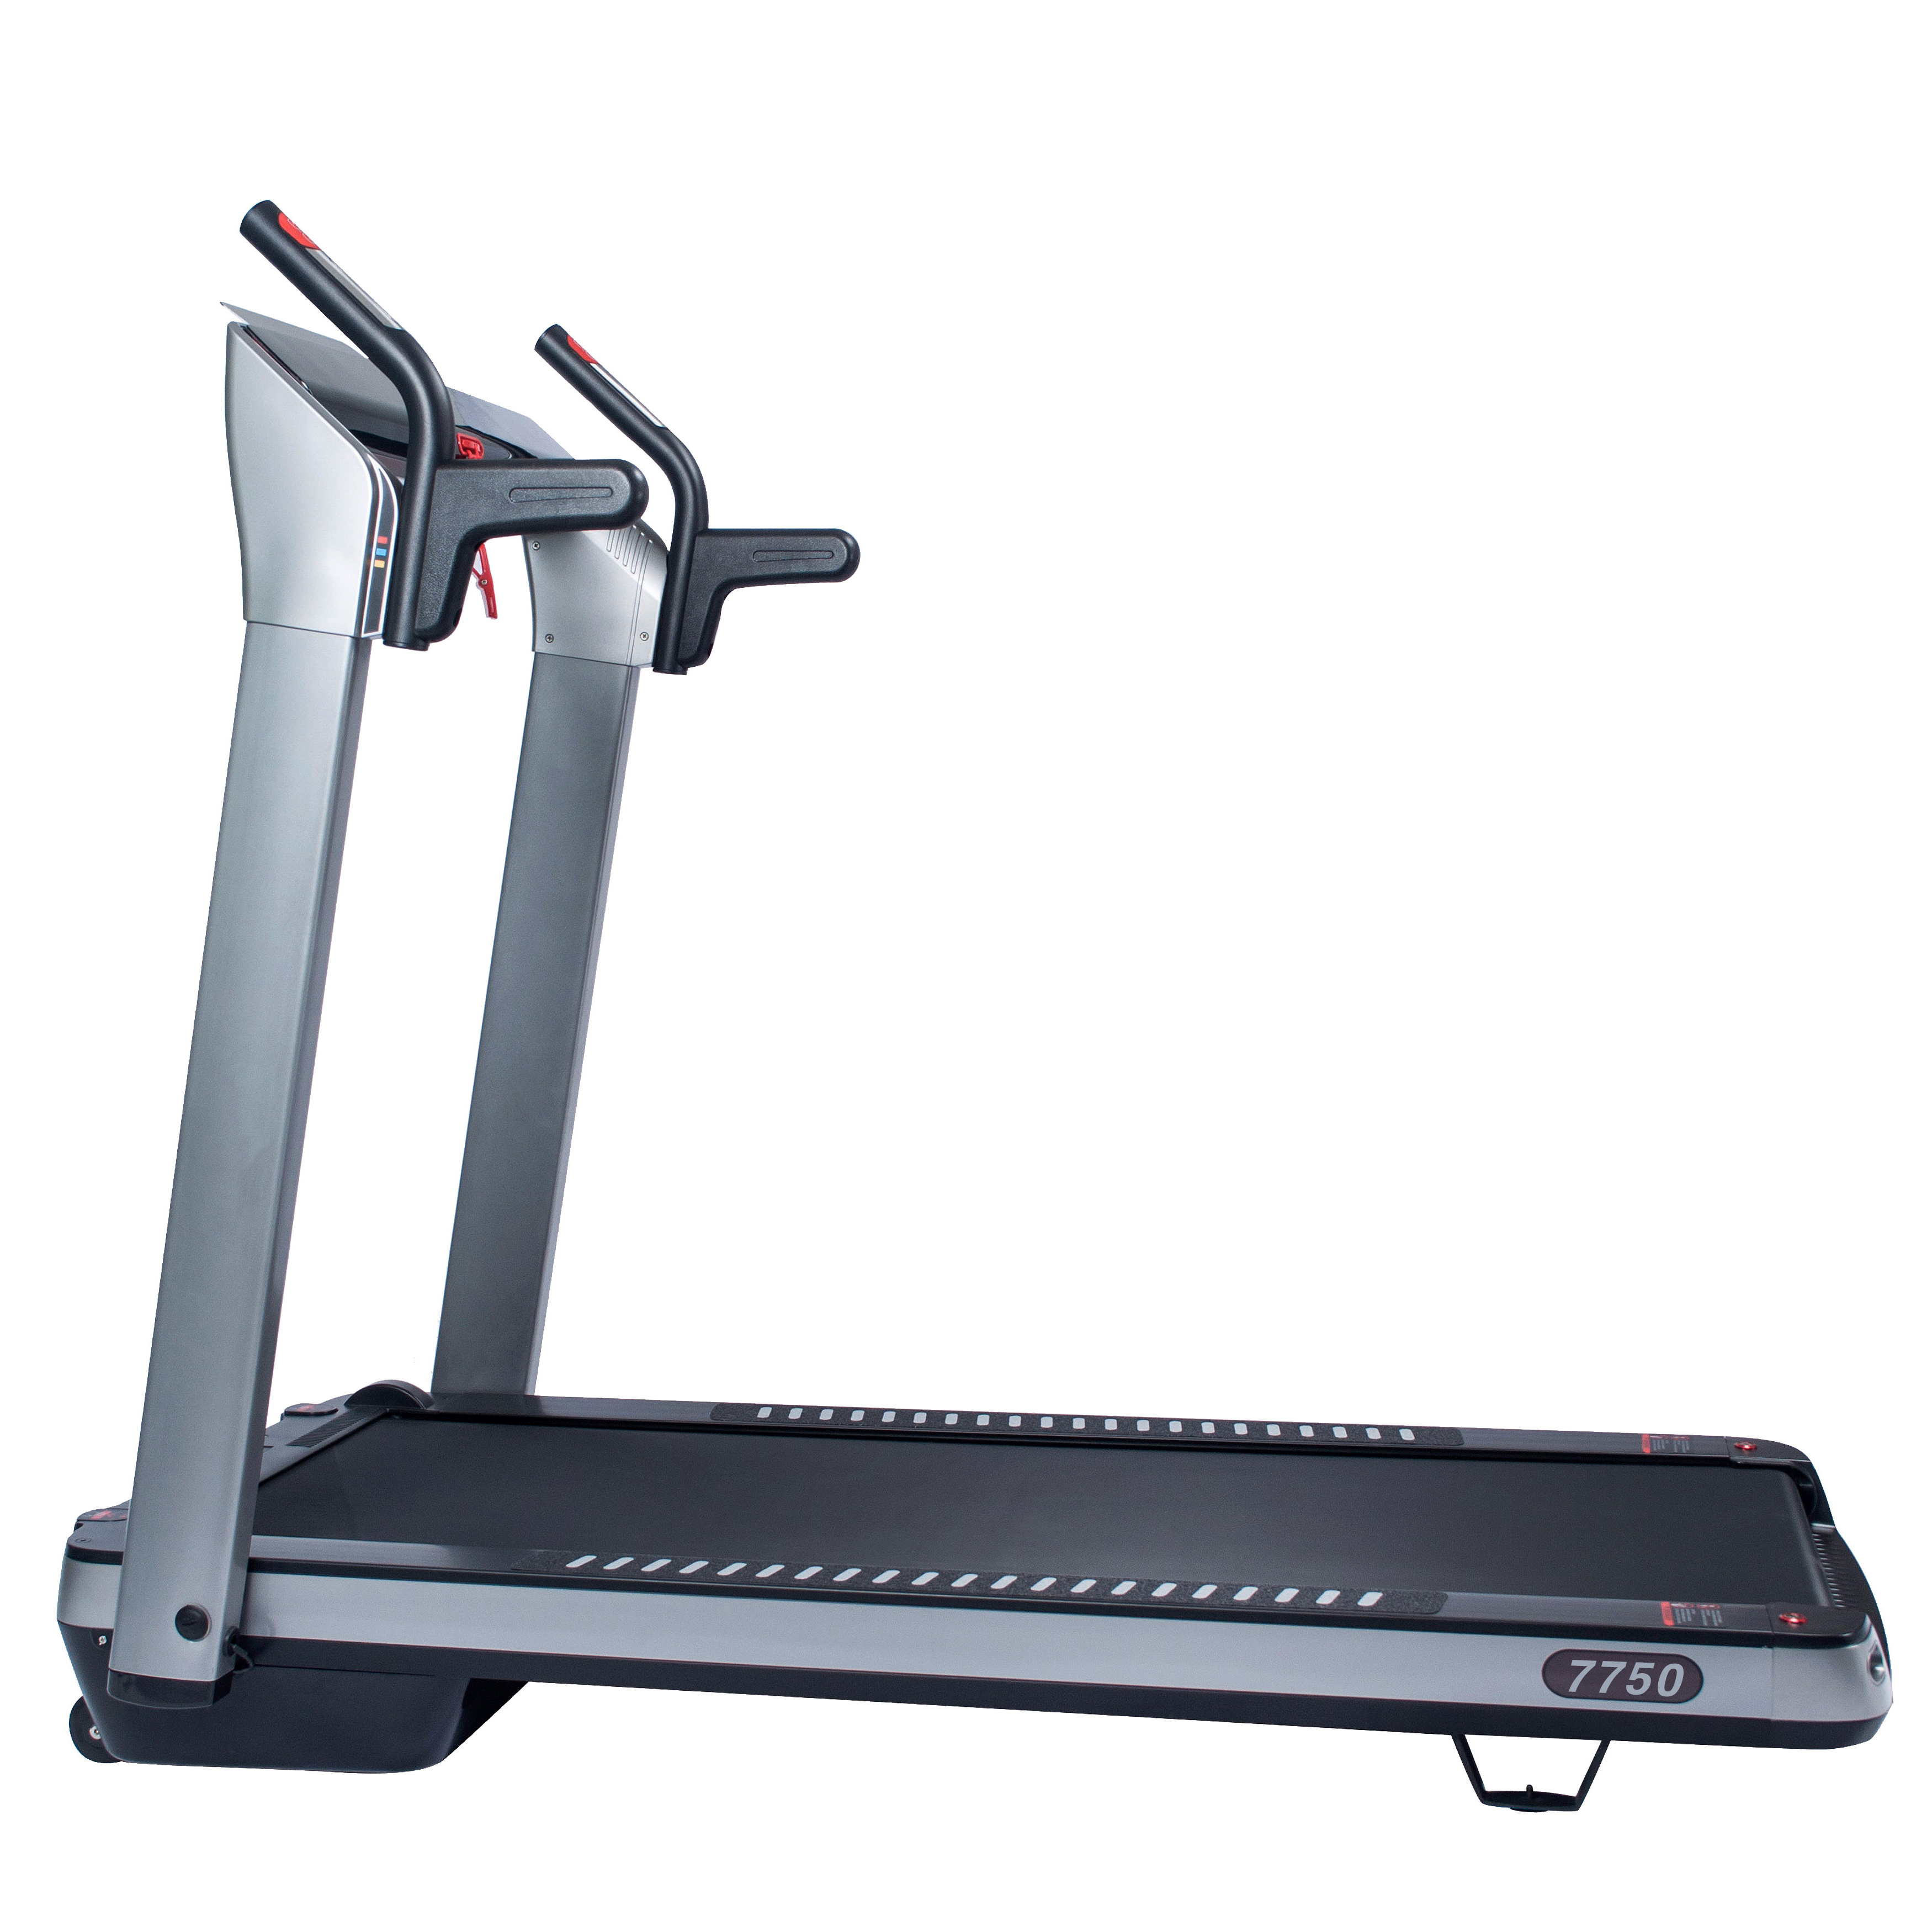 ASUNA 7750 Spaceflex Motorized Foldable Treadmill with Speakers, 6 LED Displays, 220 lb Max Weight - image 1 of 9